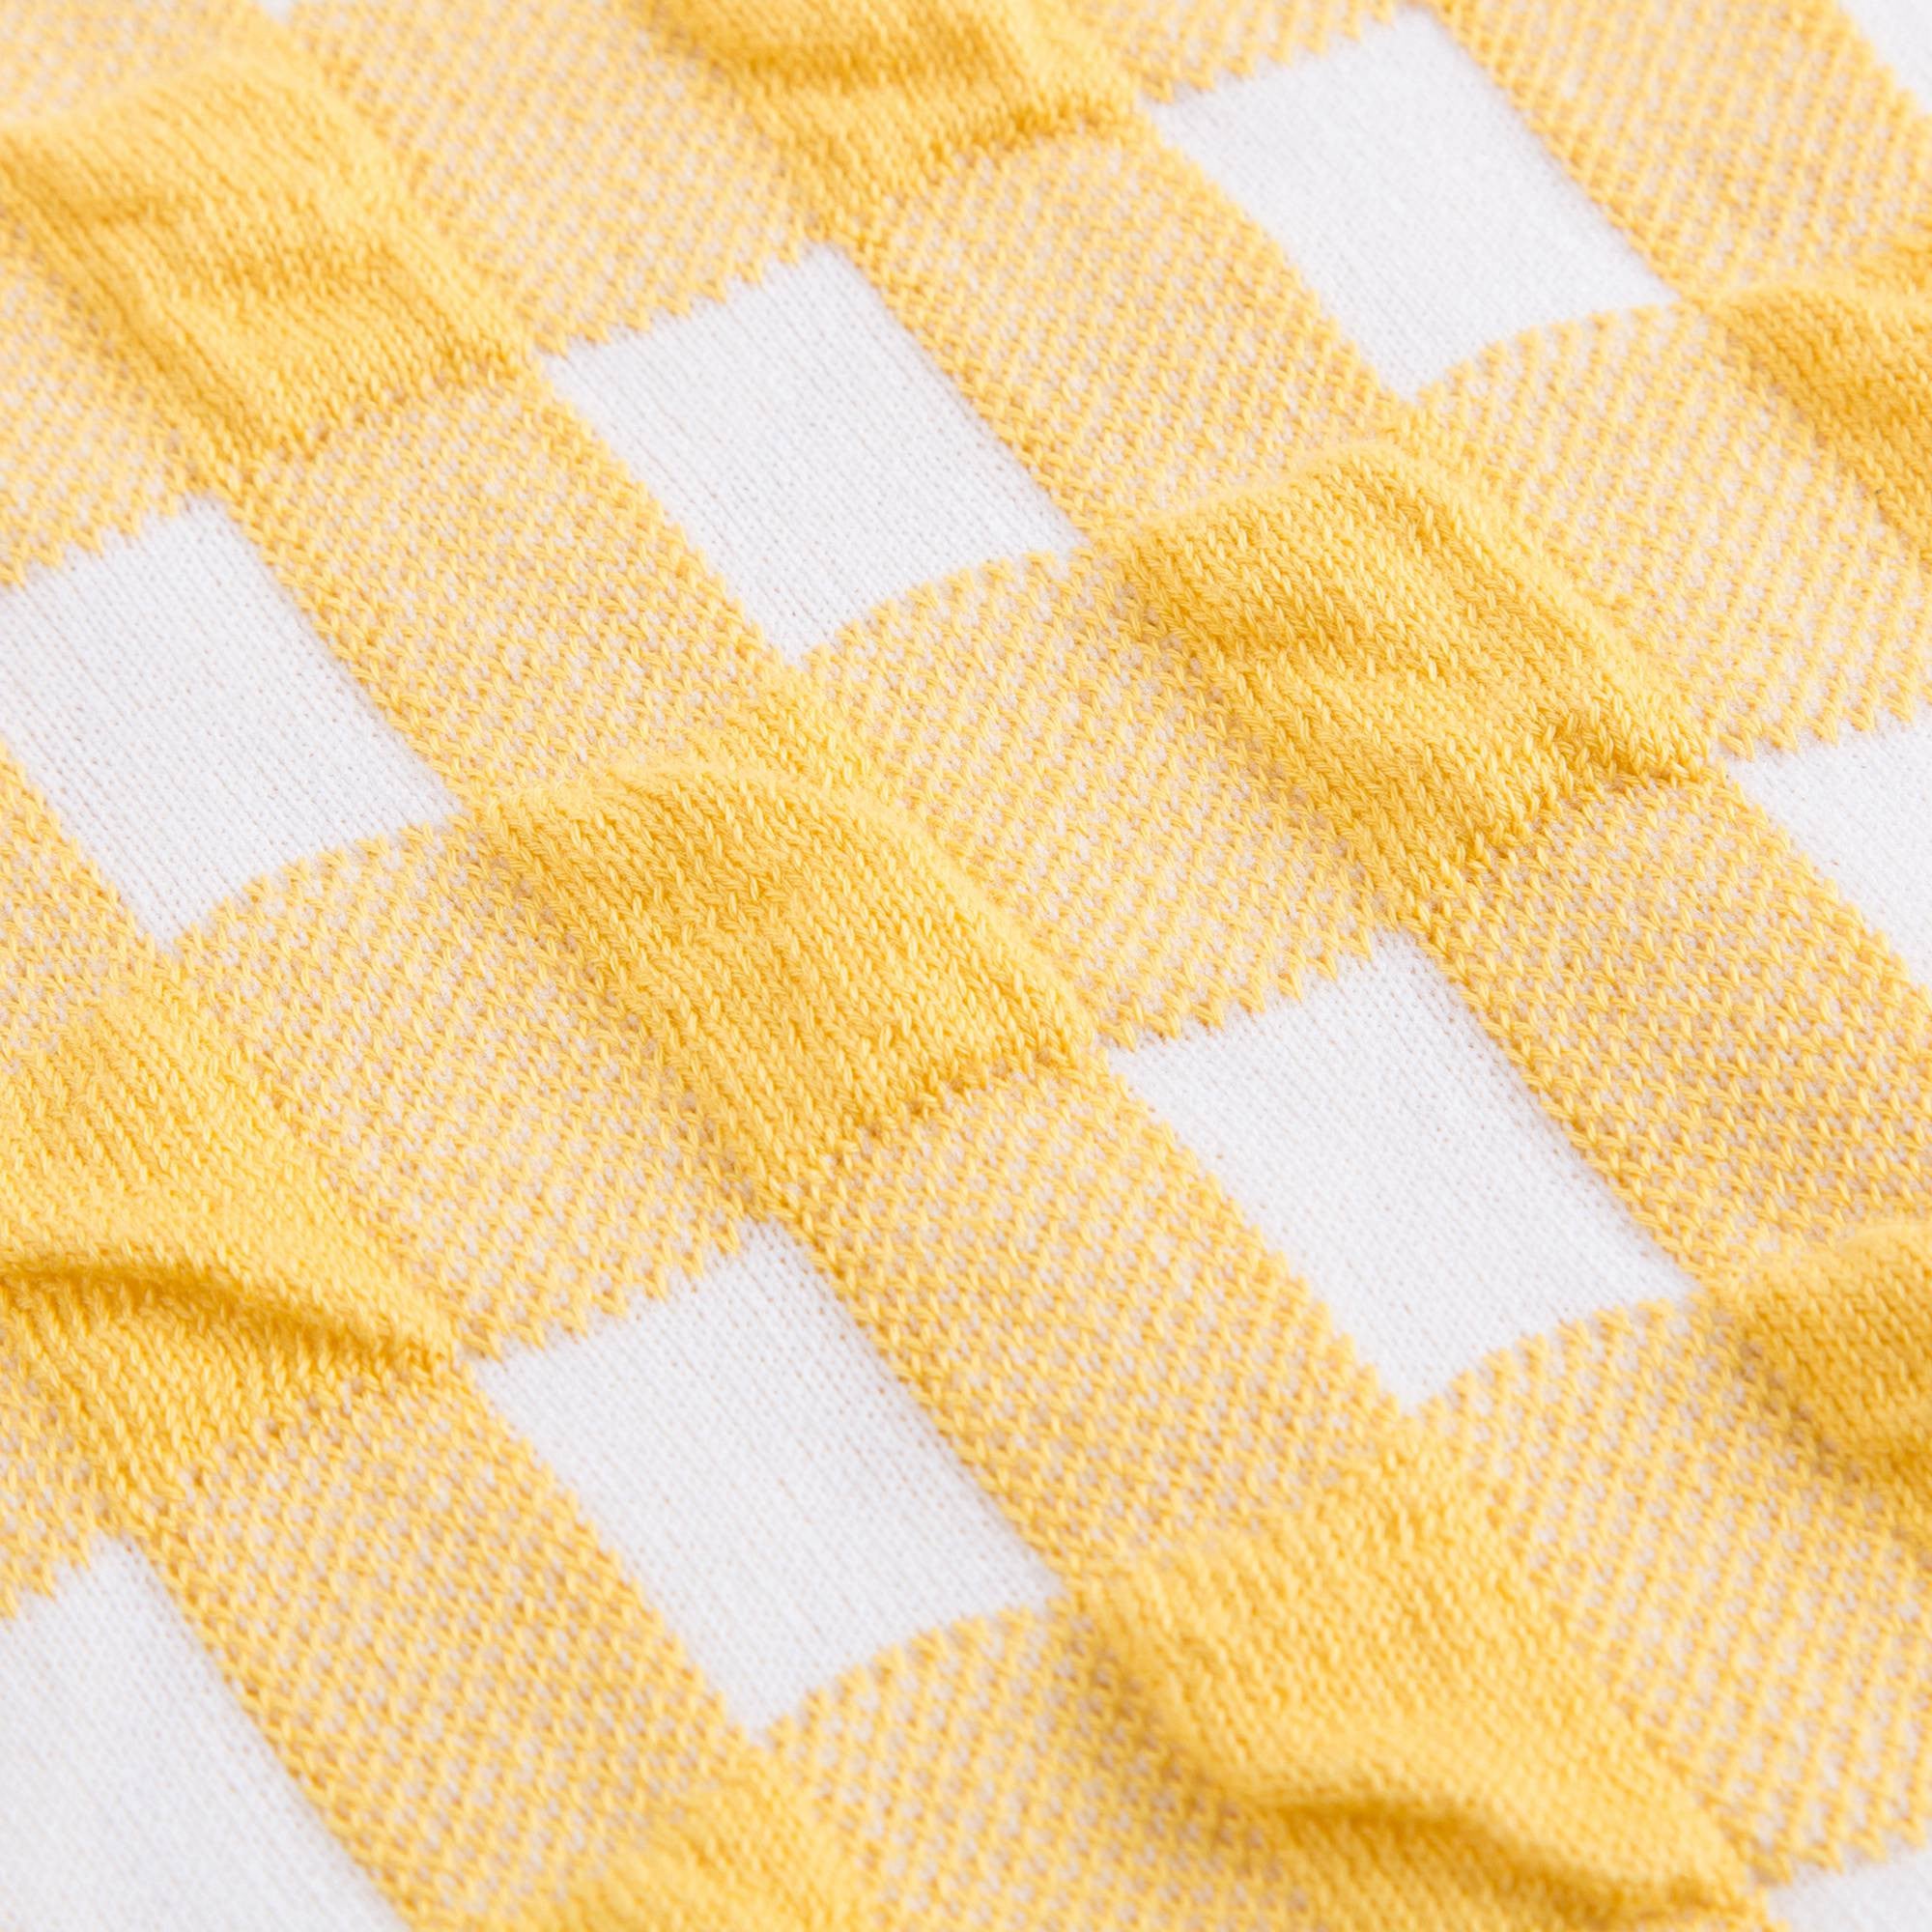 Girls Yellow Checked Knitted Sweater